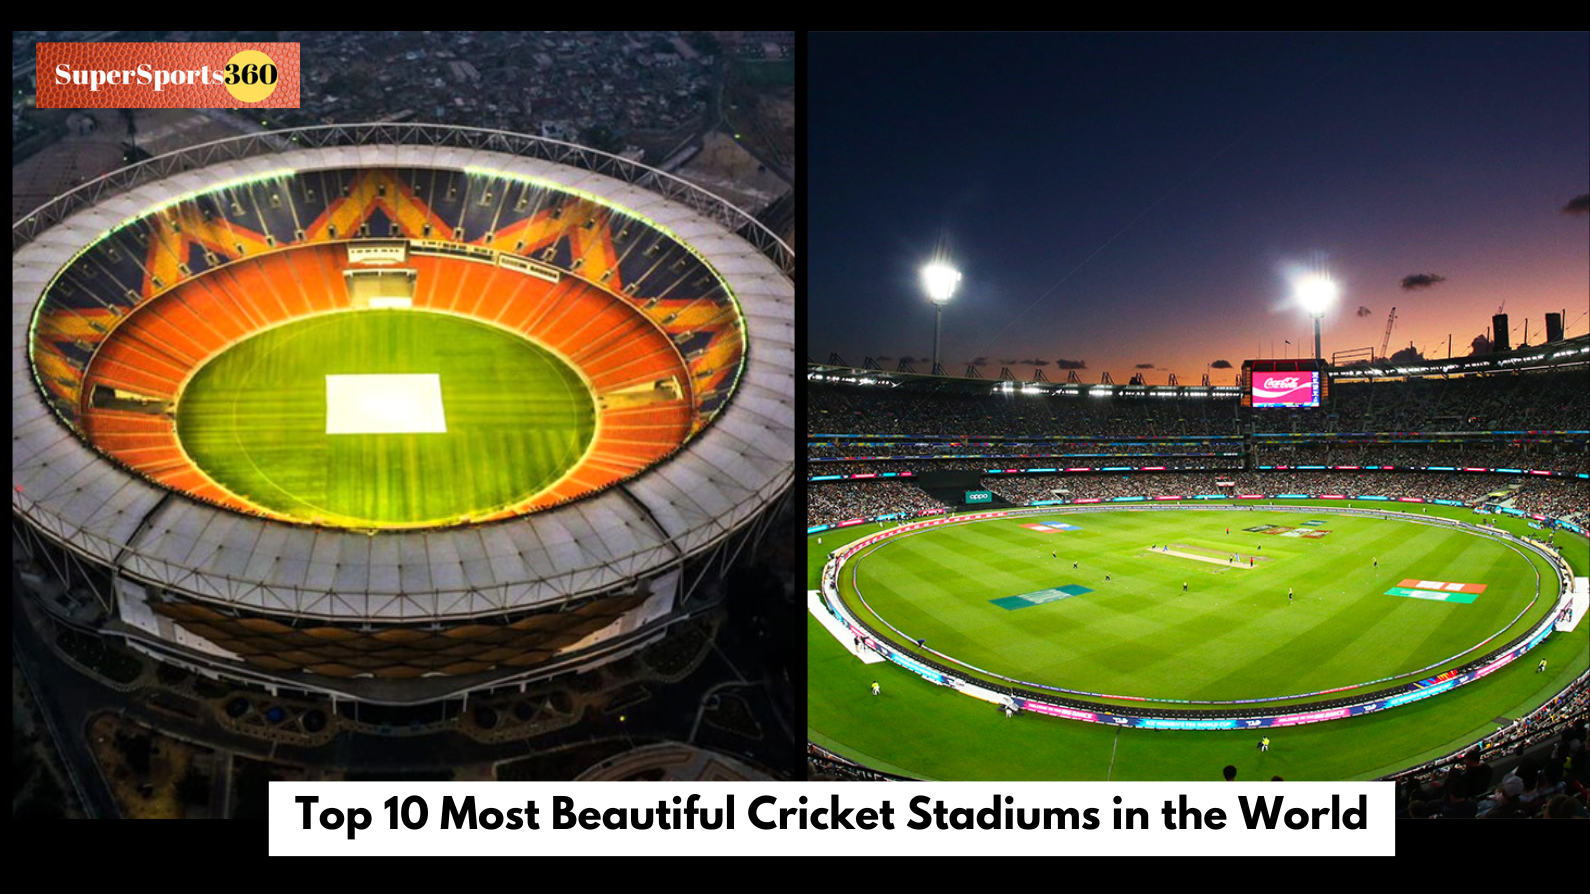 Top 10 Most Beautiful Cricket Stadiums in the World